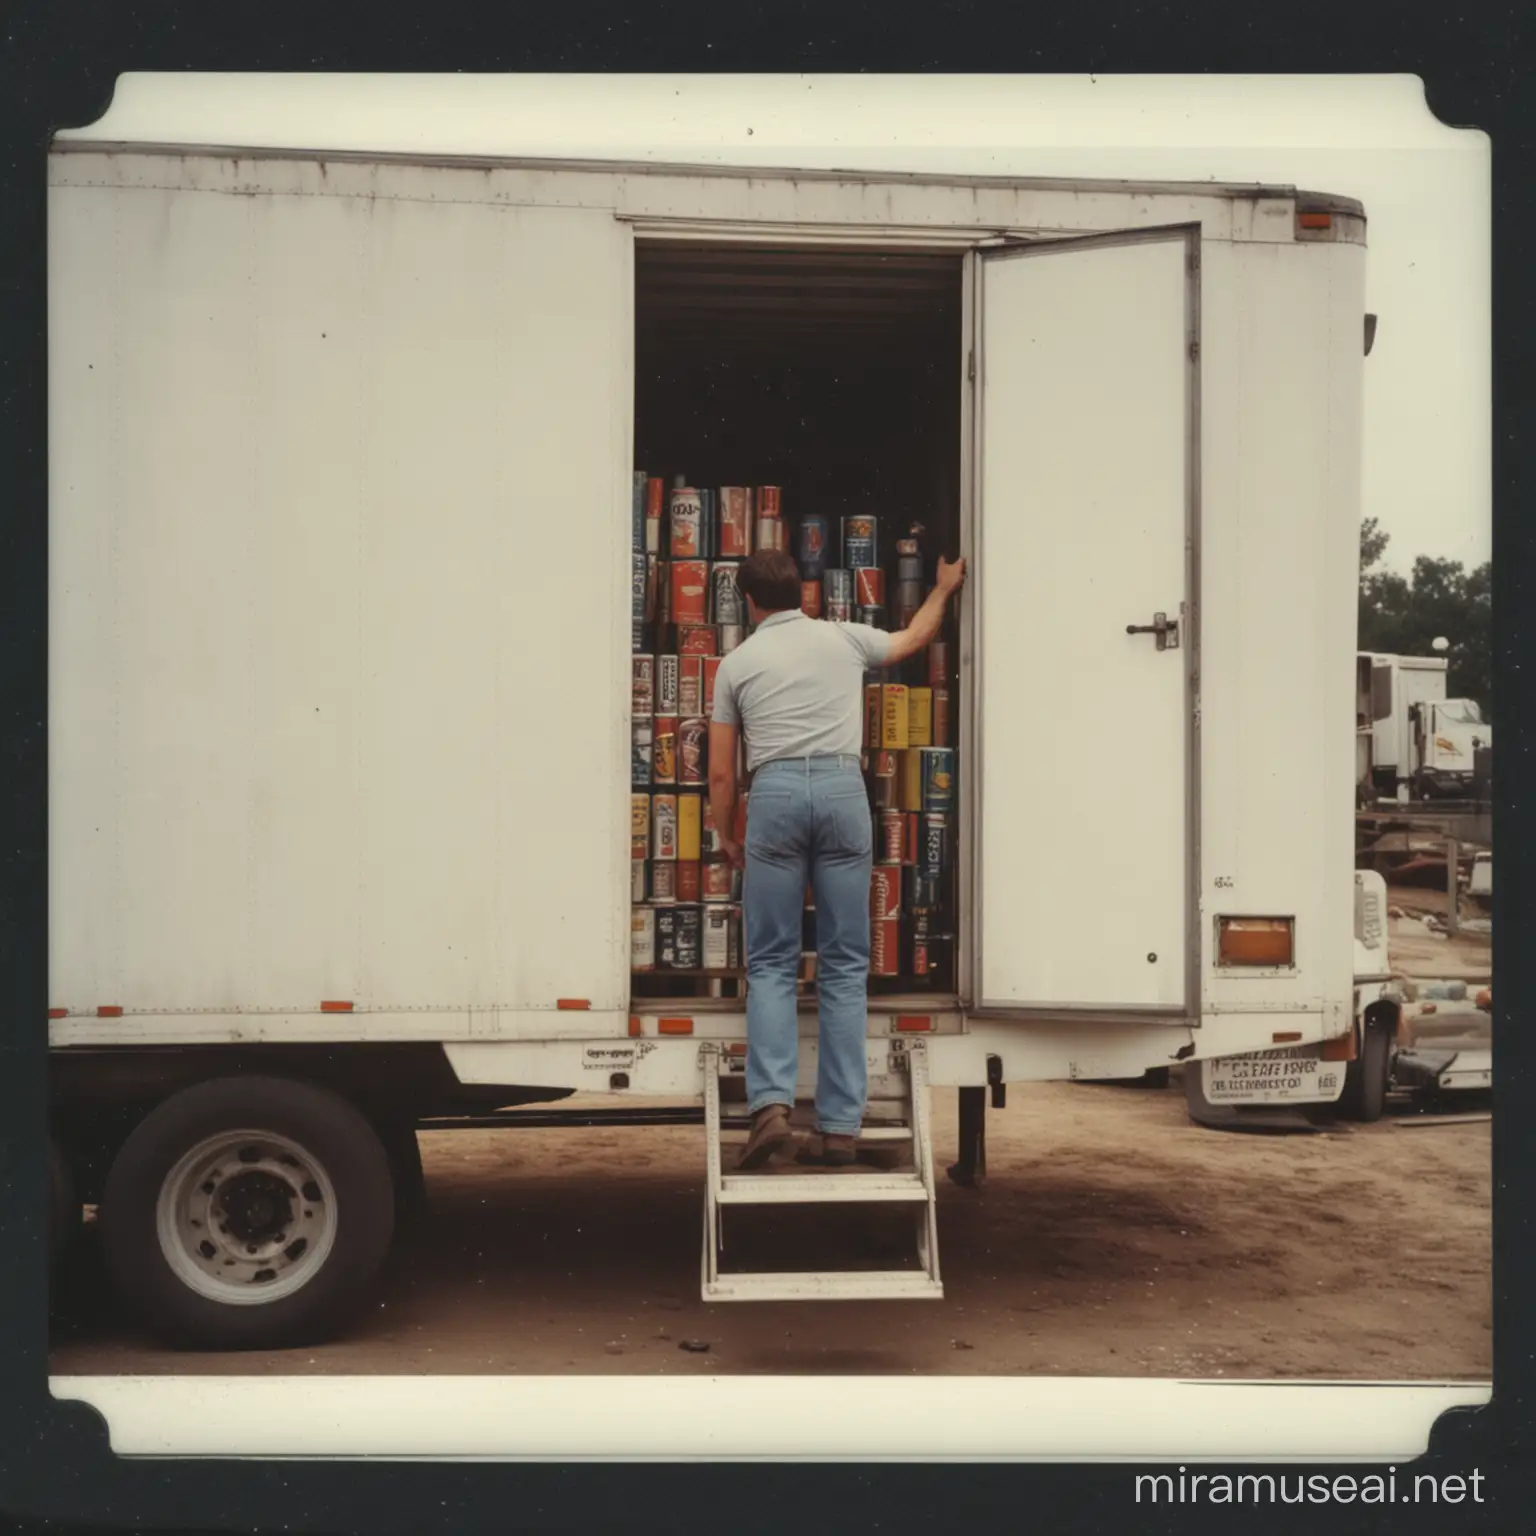  Polaroid picture from the 1980s. A guy opens a semi trailer door, you can see cans that say clearly "Farts". 